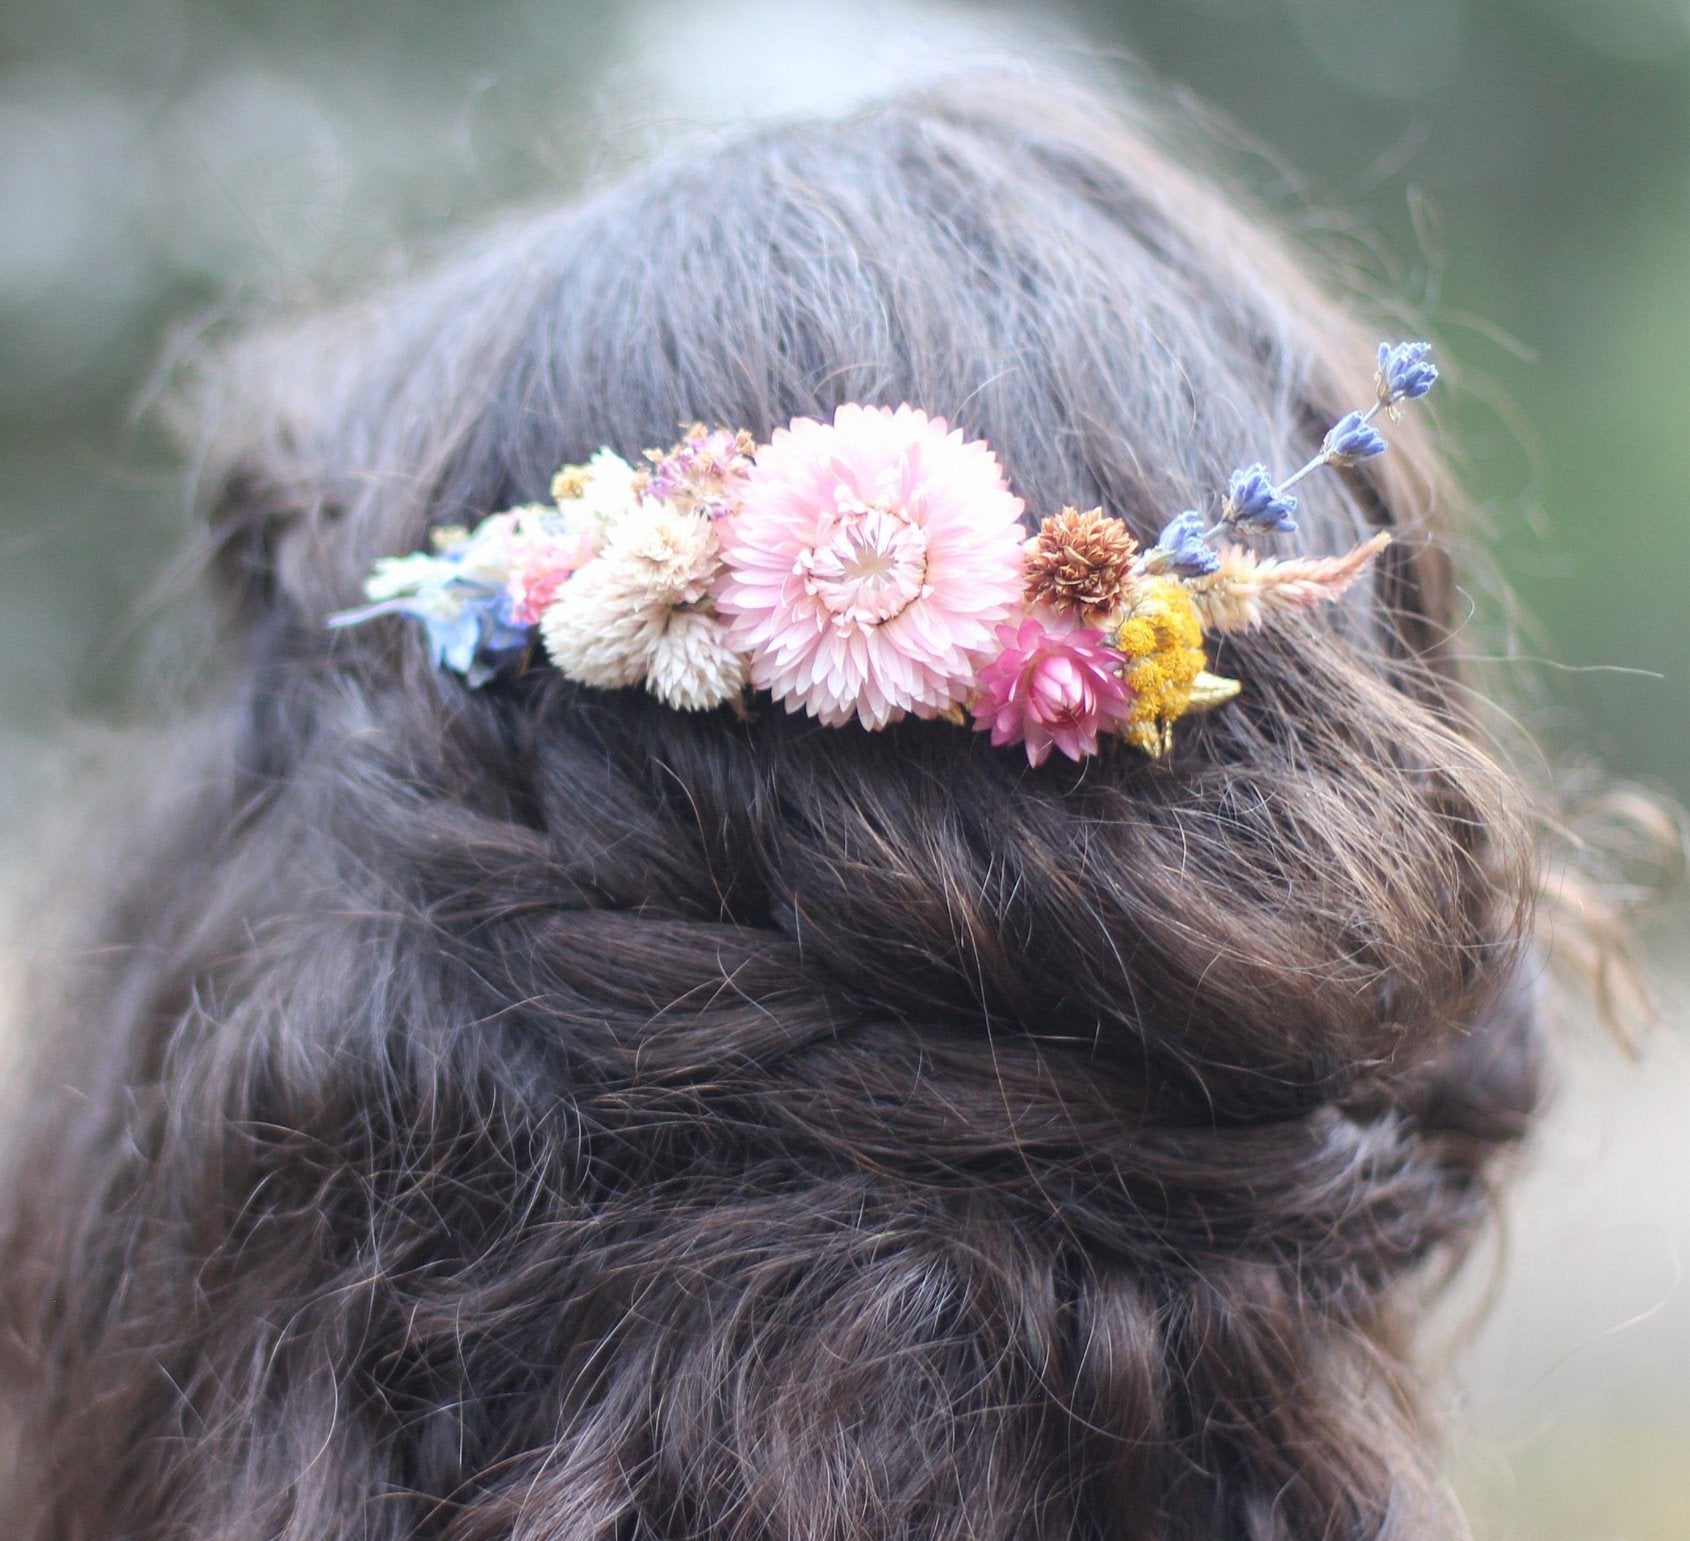 Preorder * Rustic Dried Flowers Hair Comb